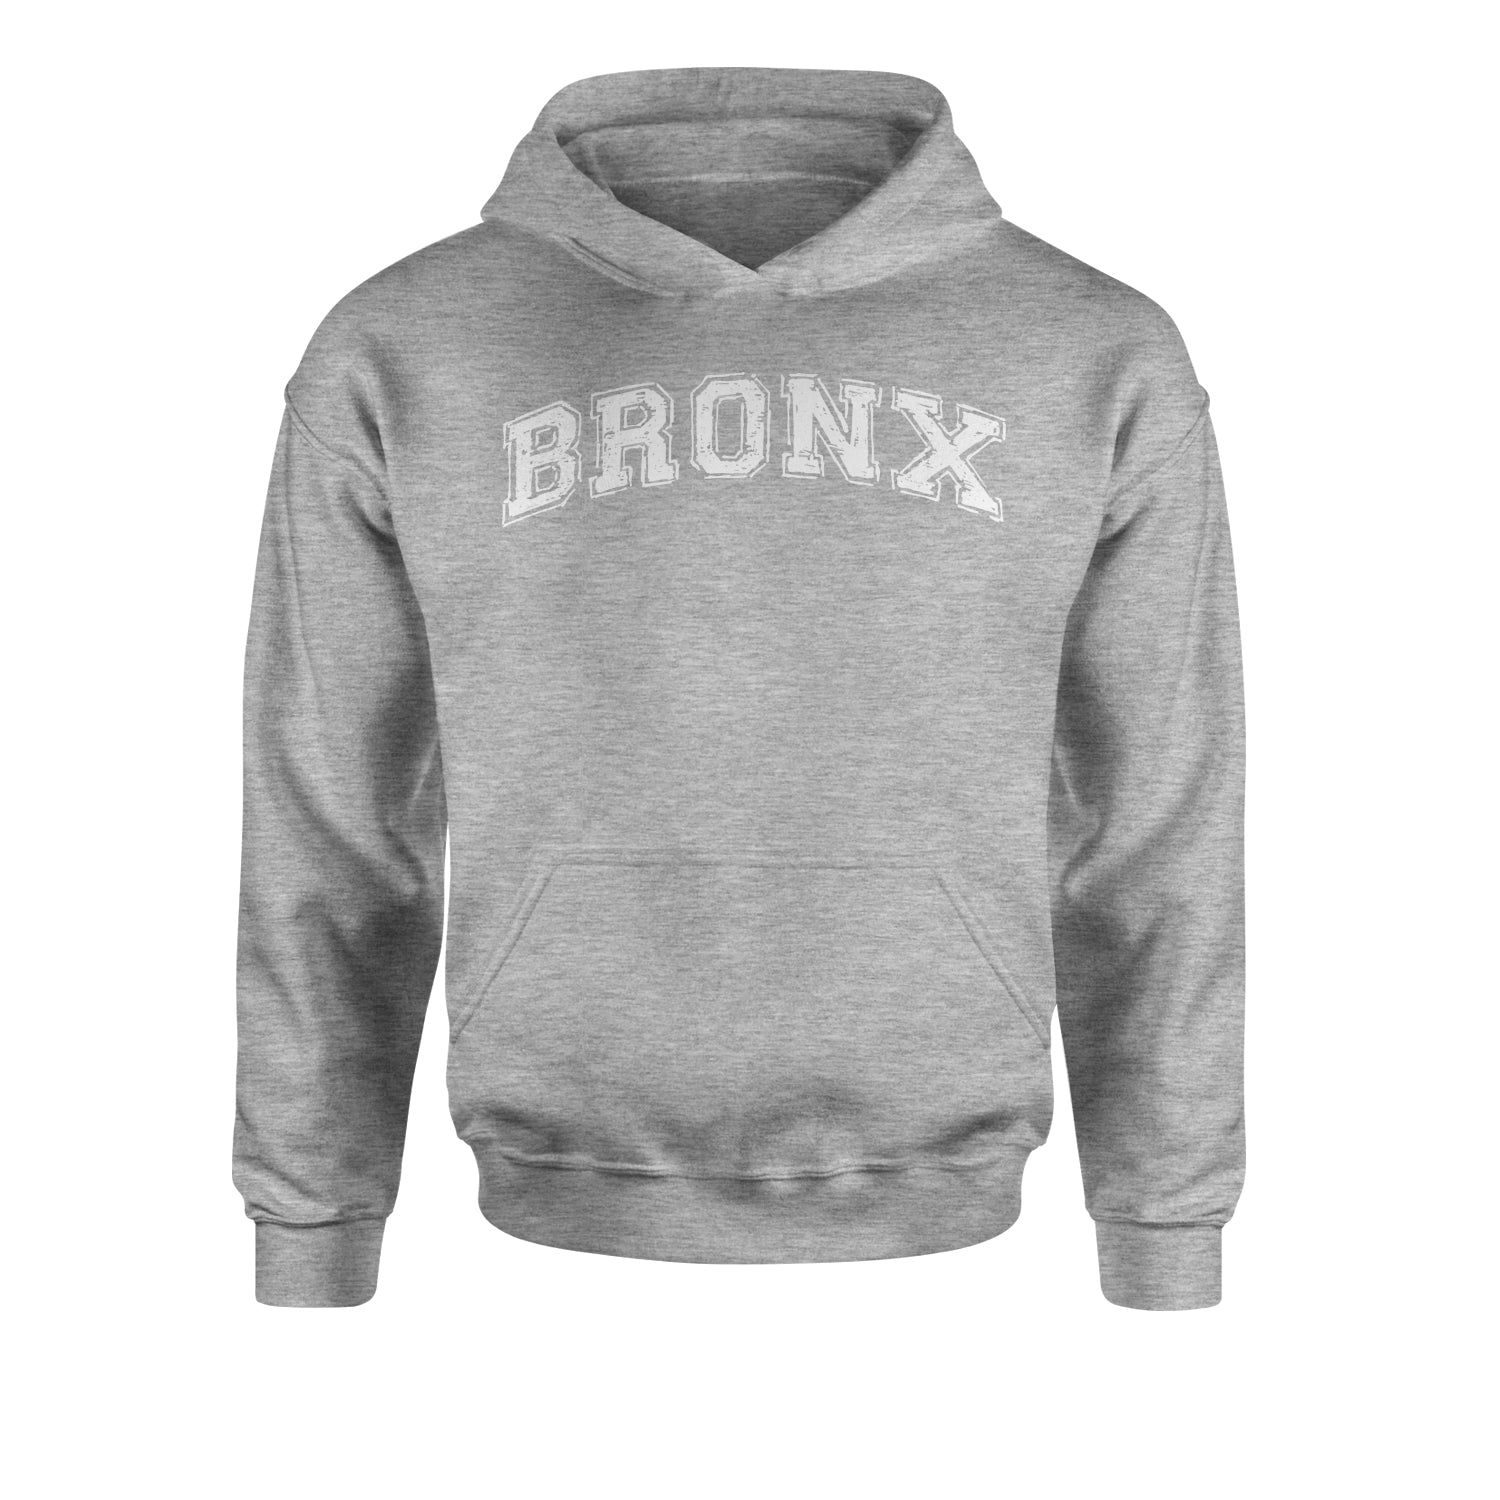 Bronx - From The Block Youth-Sized Hoodie b, cardi, concert, its, Jennifer, lopez, merch, my, party, tour by Expression Tees